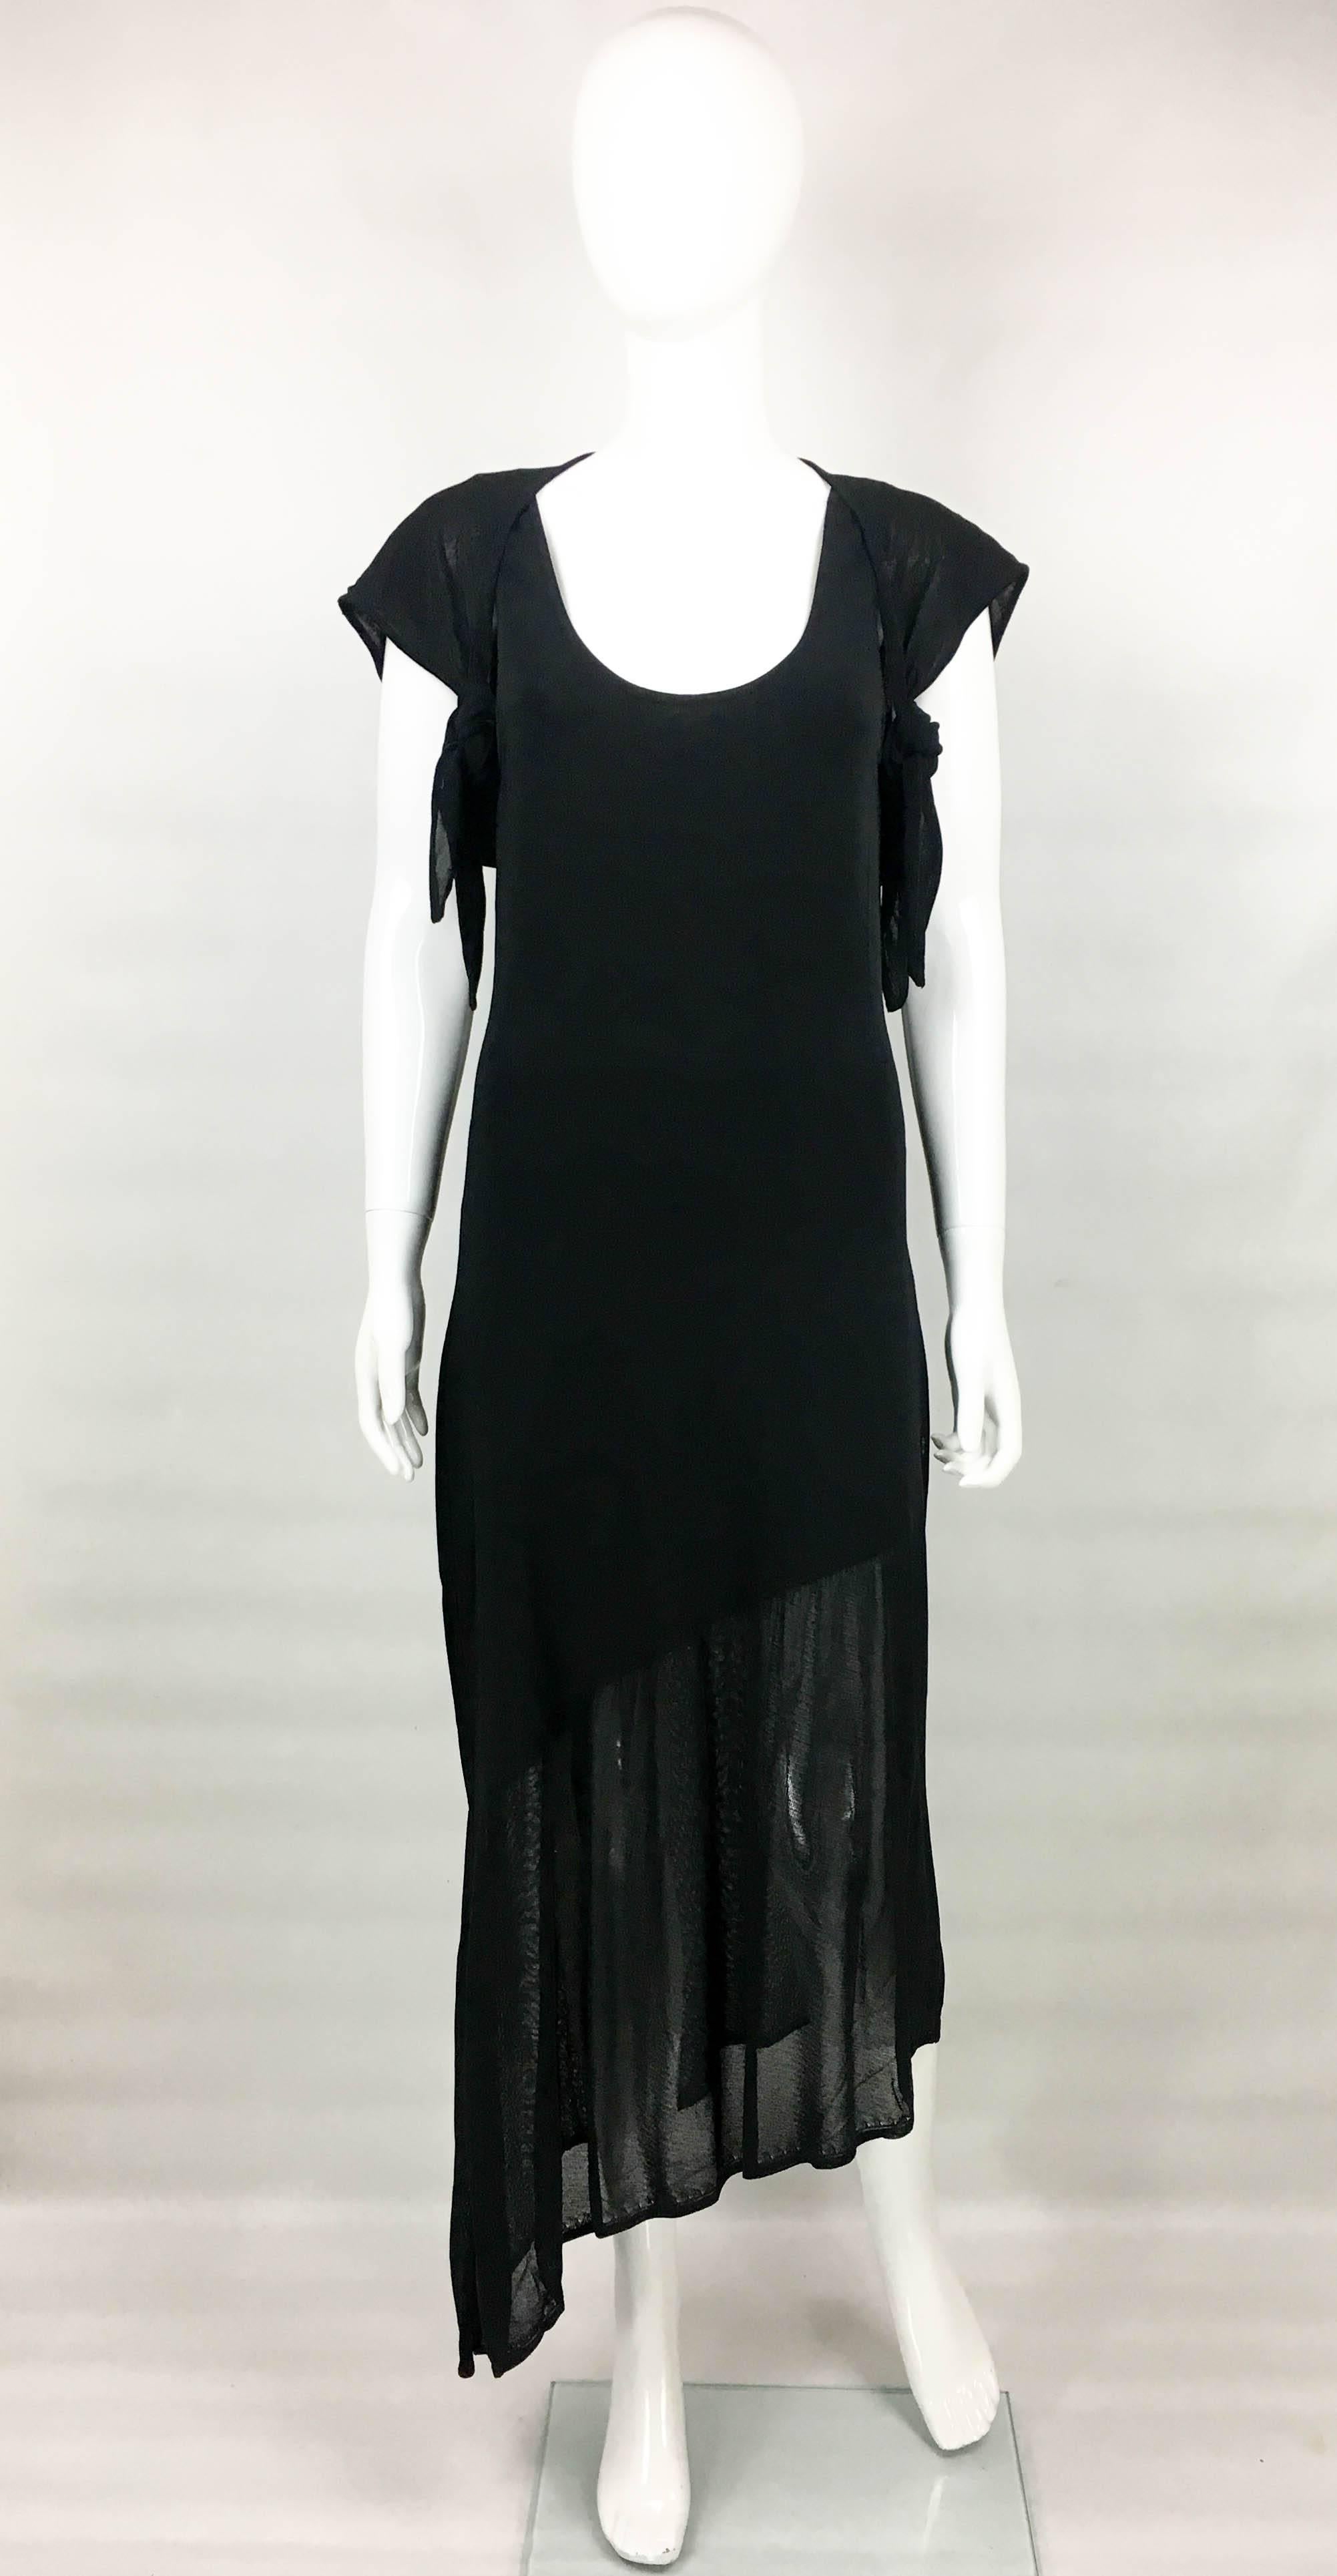 Vintage Chanel Asymmetrical Black Dress. This stylish dress dates back from 2002. For this collection Karl Lagerfeld’s inspiration was dance and ballet (one of Coco Chanel’s passions). Sleeveless and loose-fitting, it features an asymmetrical